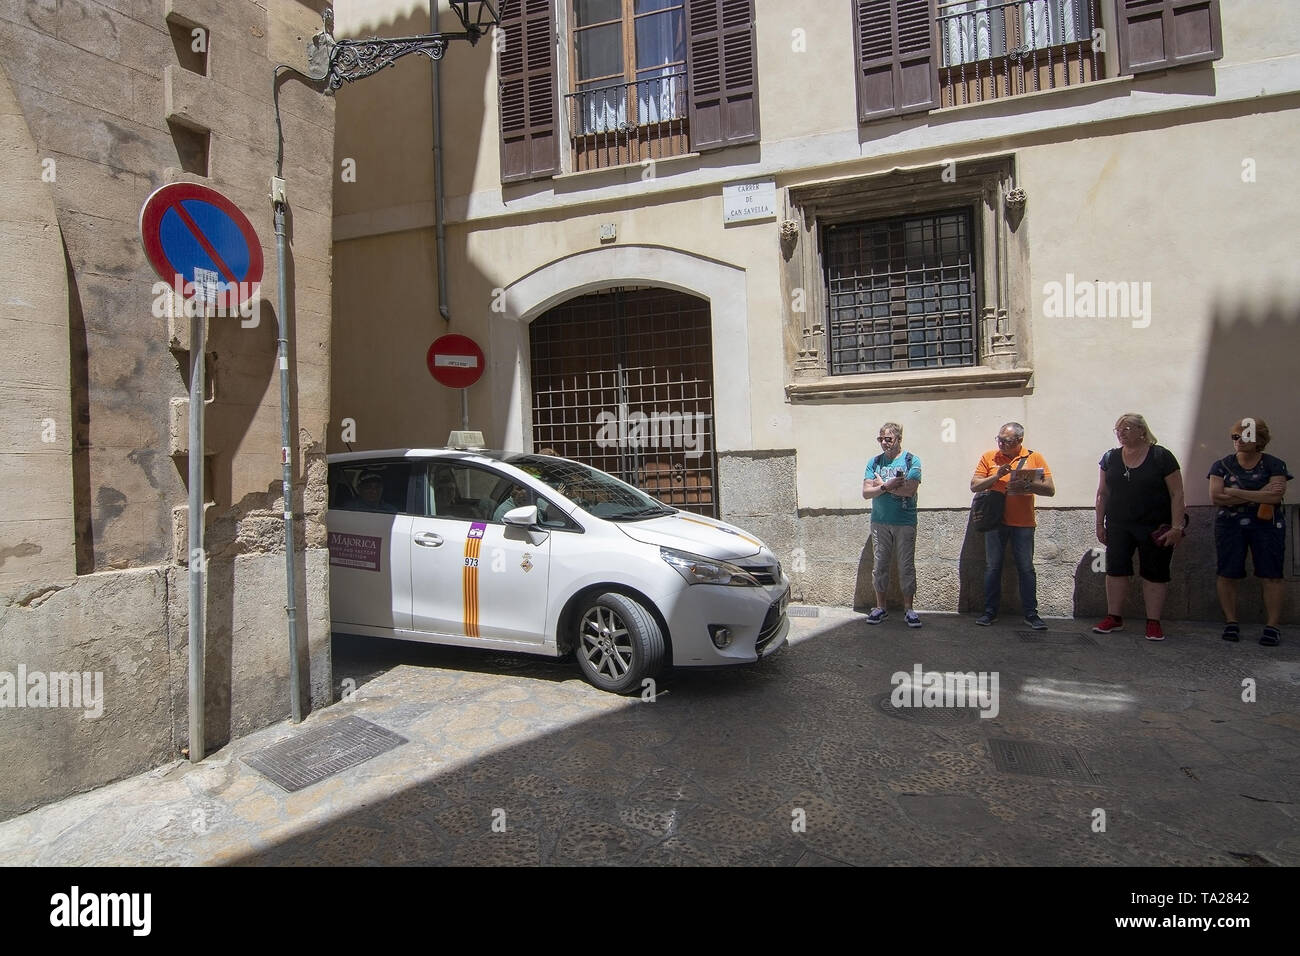 PALMA, MALLORCA, SPAIN - MAY 20, 2019: Taxi approaching in narrow alley on May 20, 2019 in Palma, Mallorca, Spain. Stock Photo